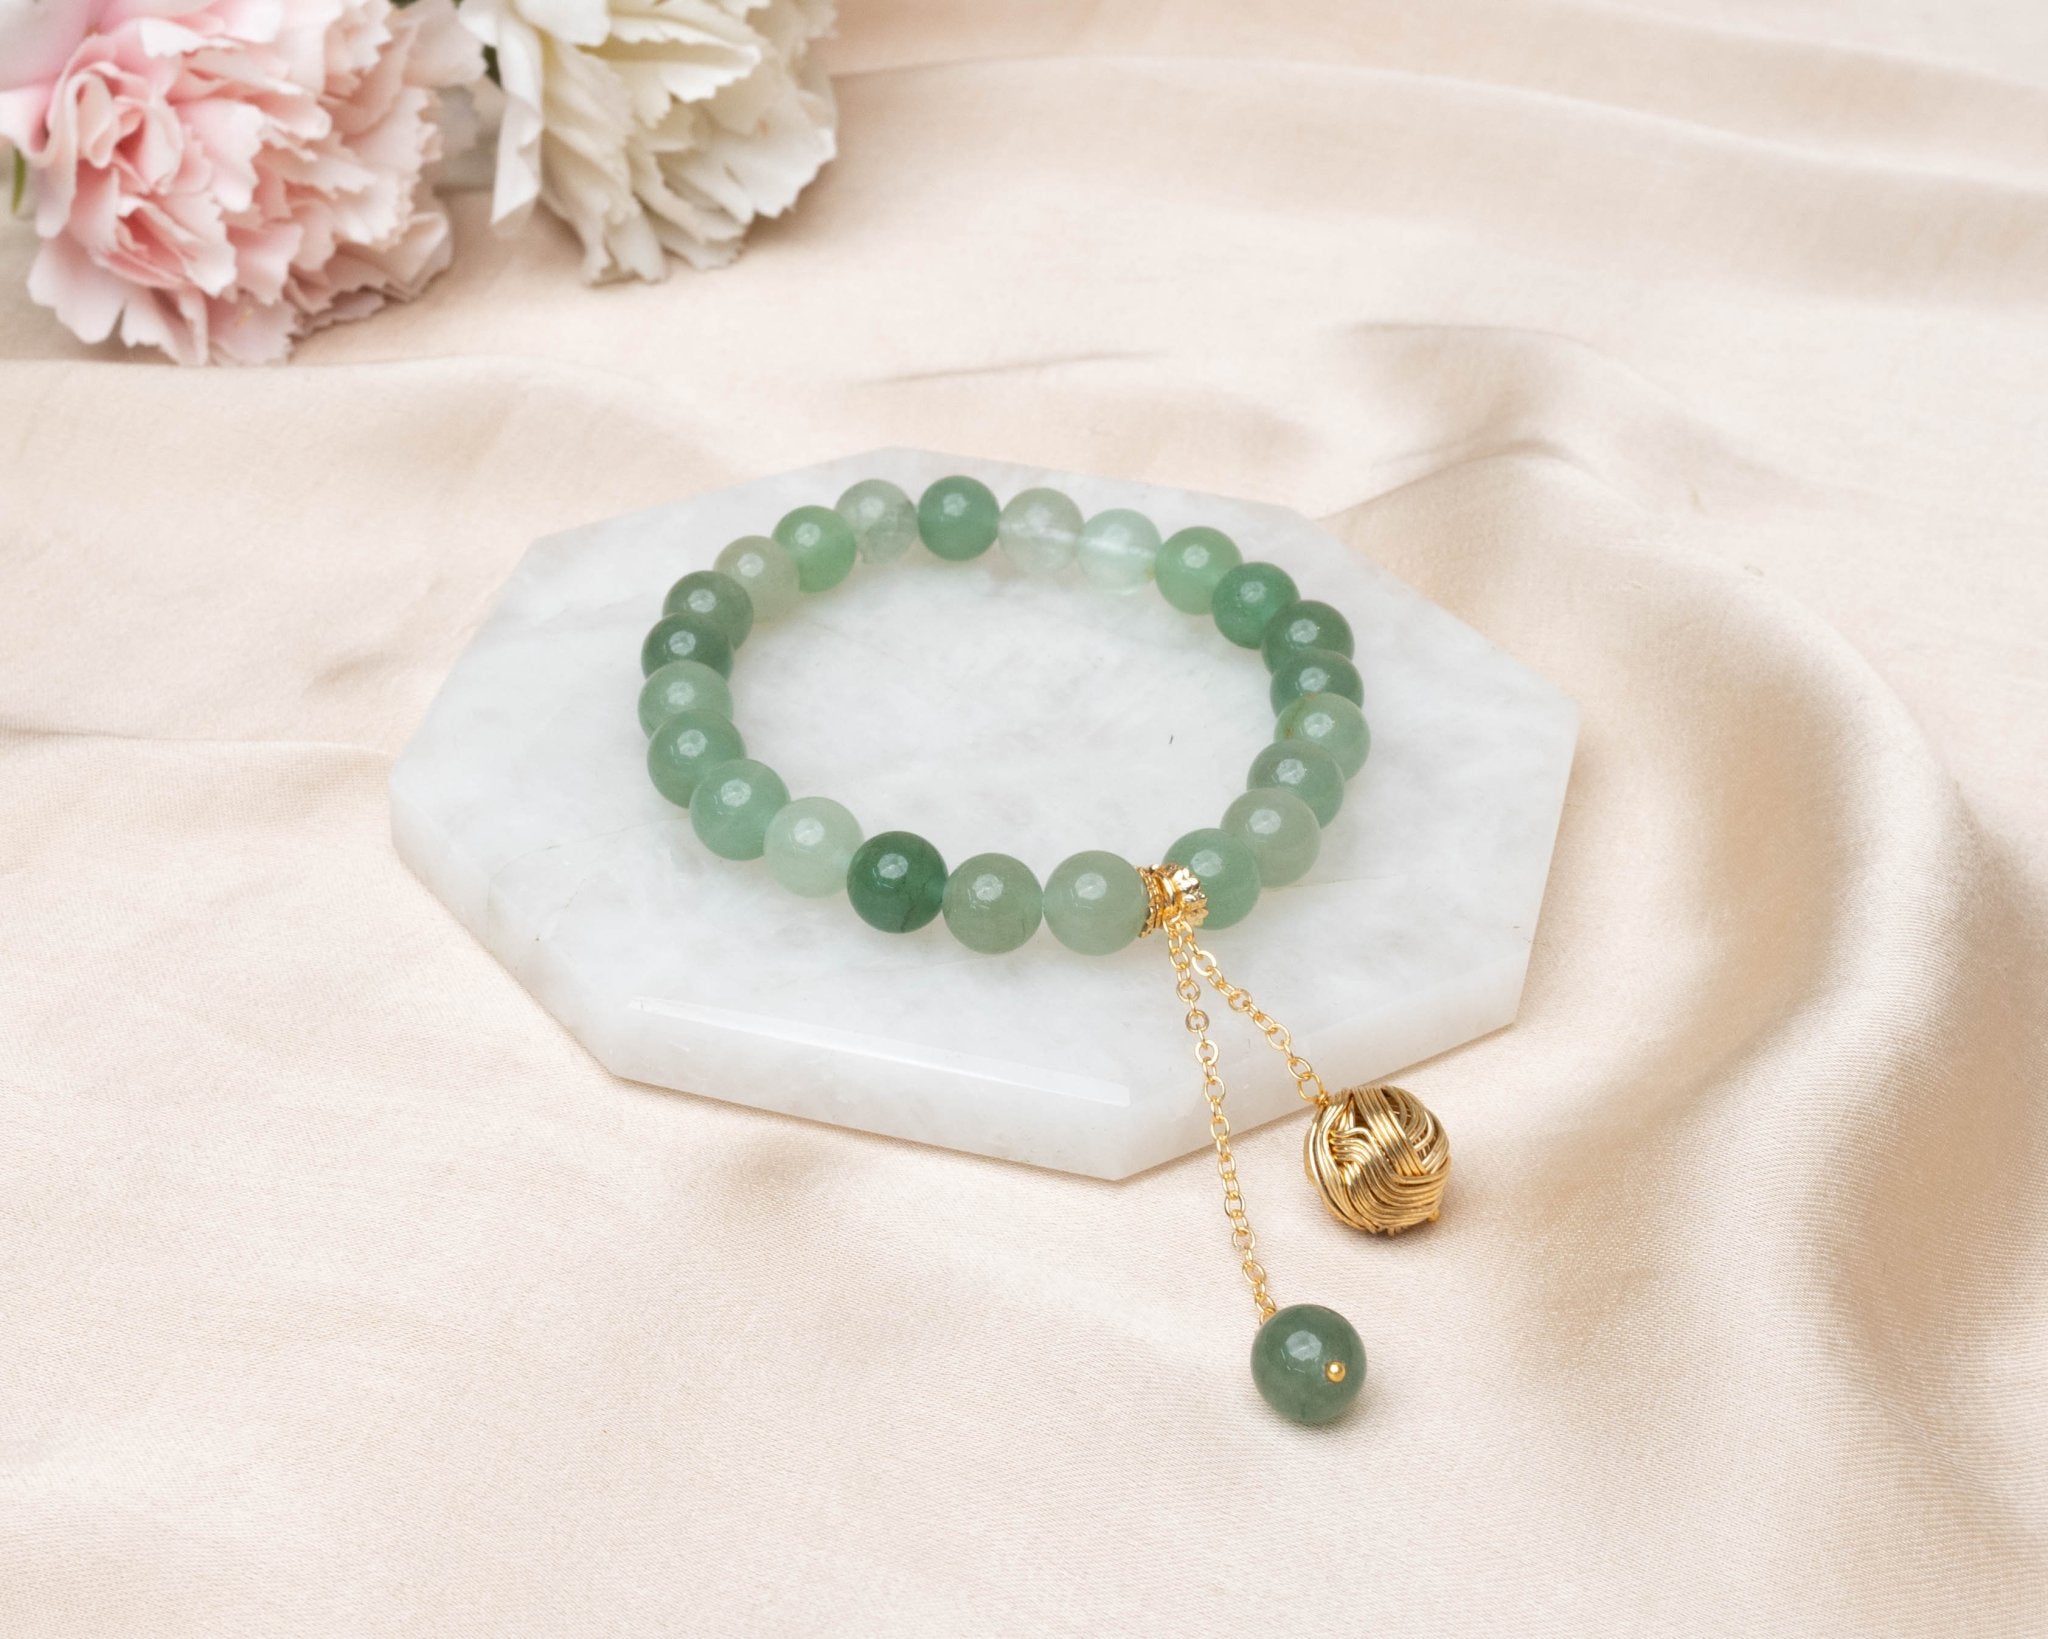 Green Aventurine With Golden Hanging Charm Lumba - Bodh Gem and Crystals